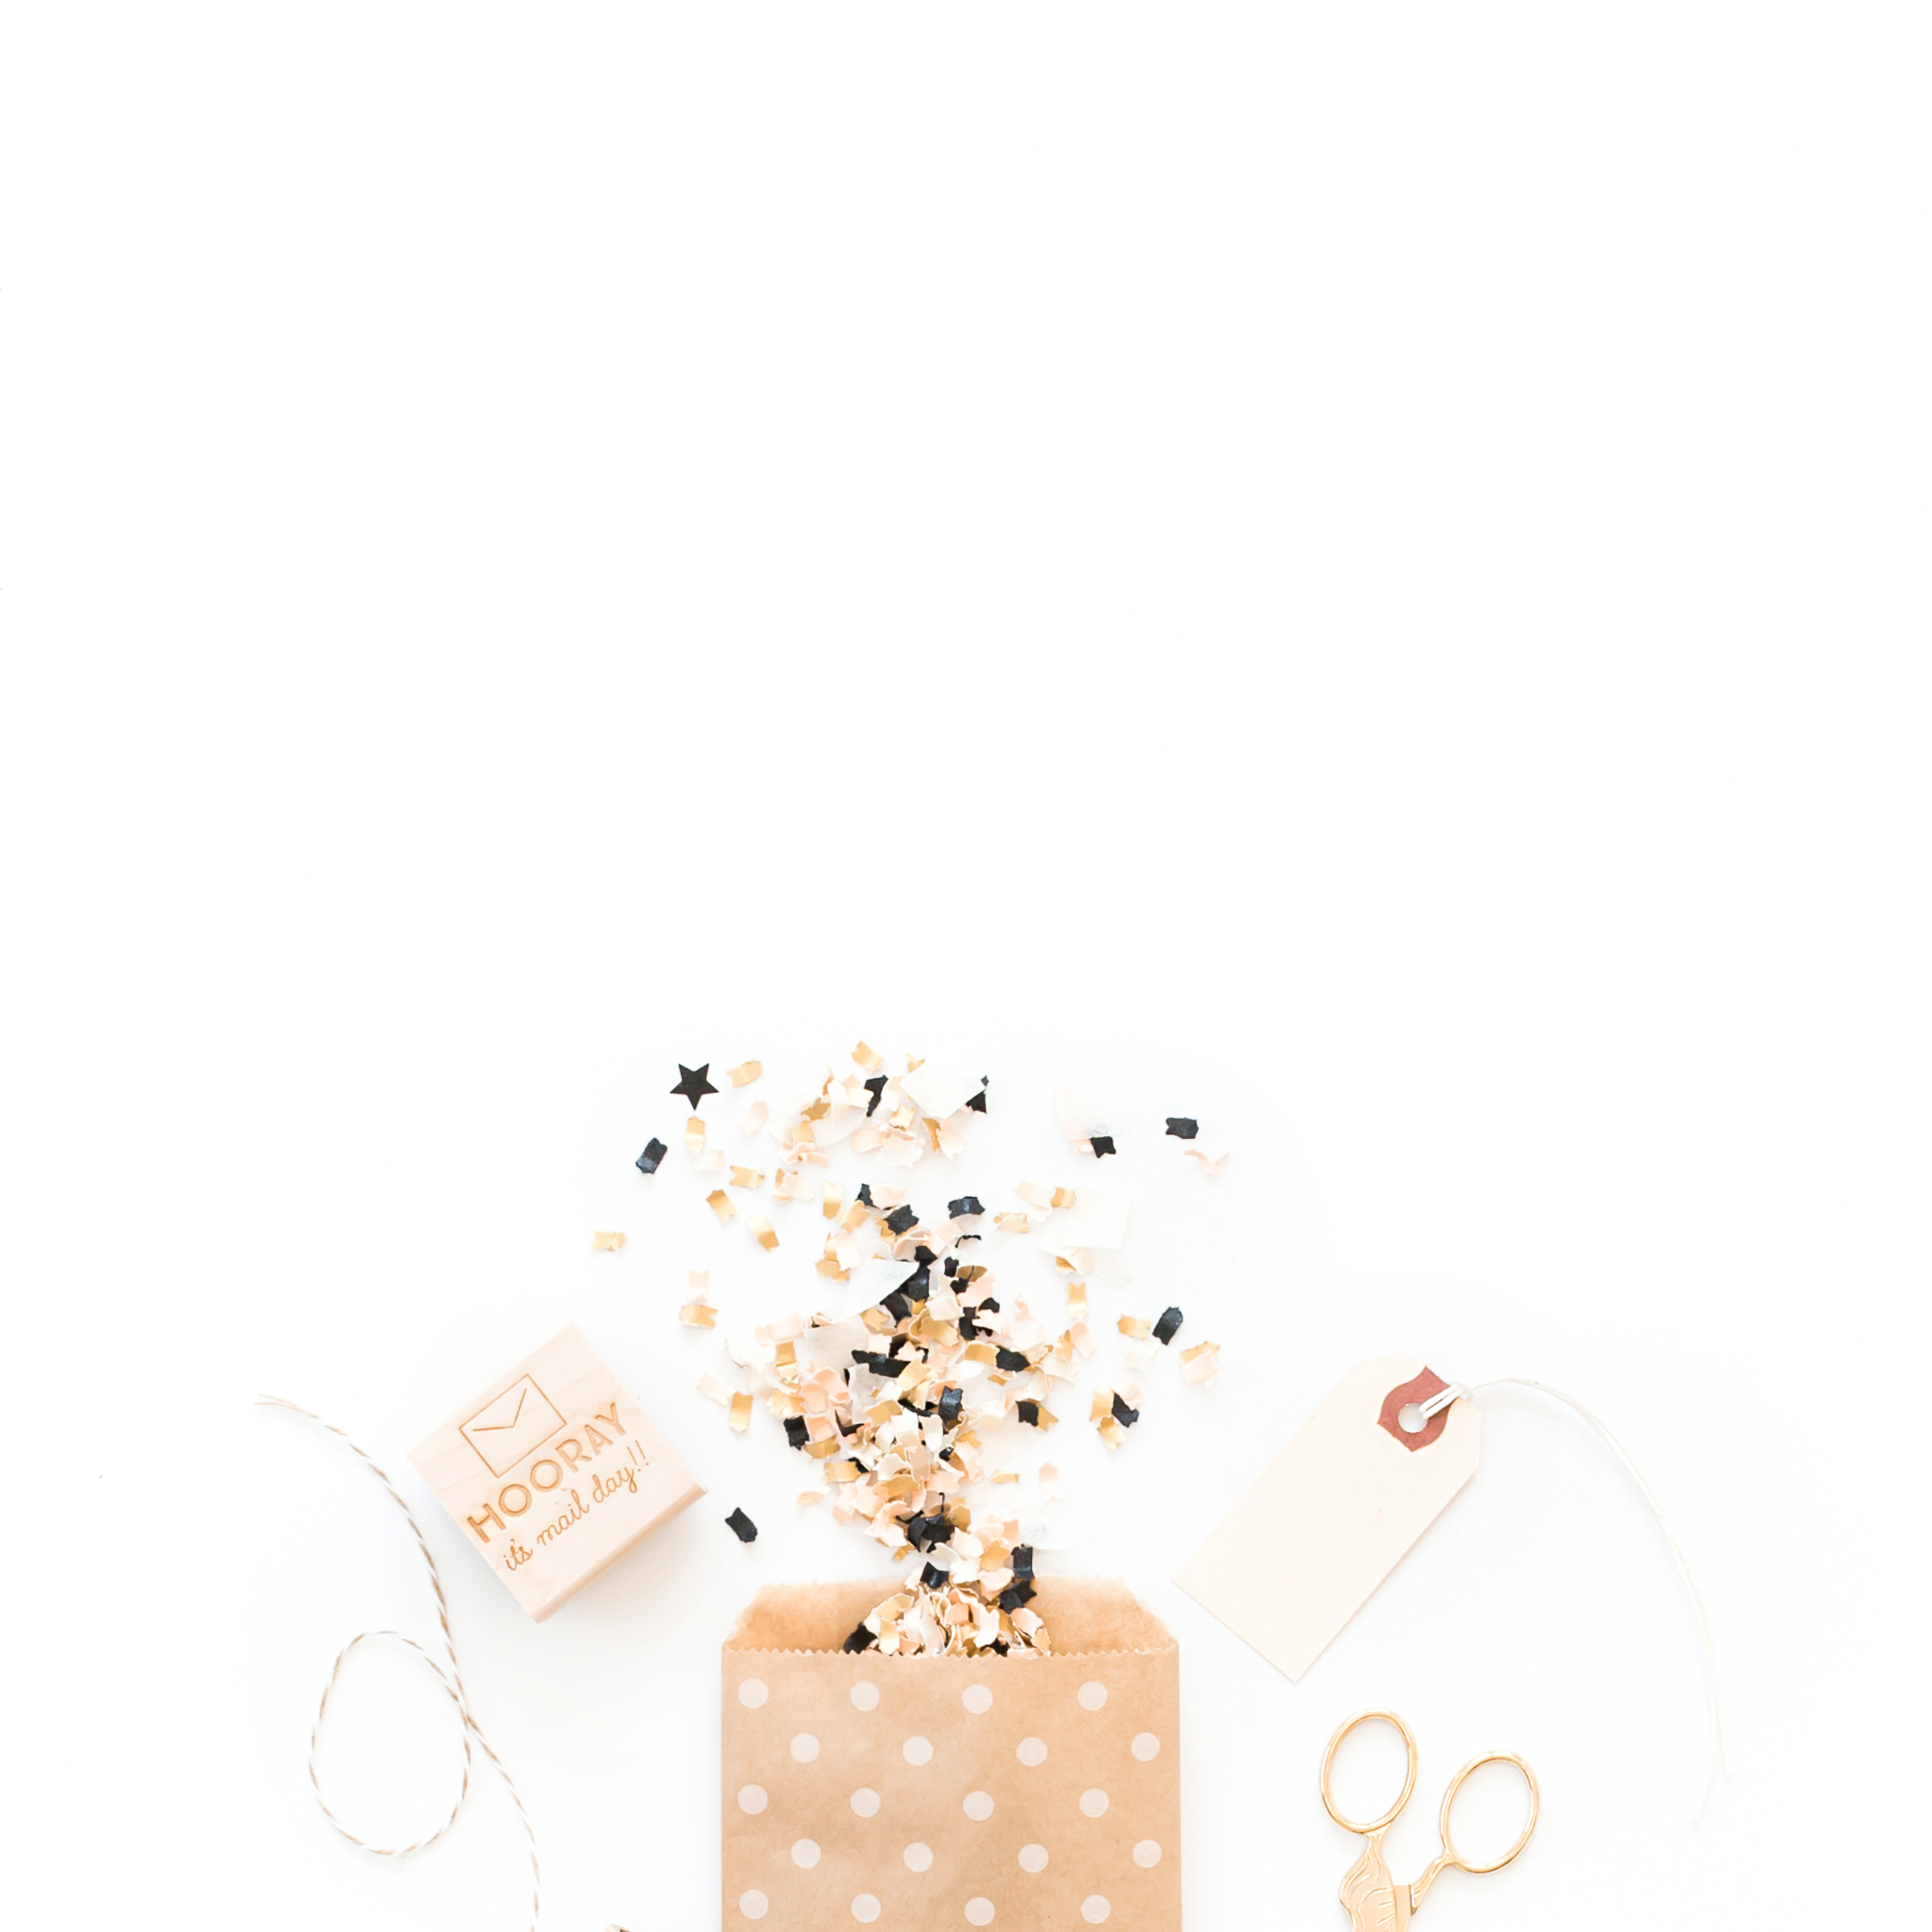 haute-stock-photography-pretty-packaging-final-44